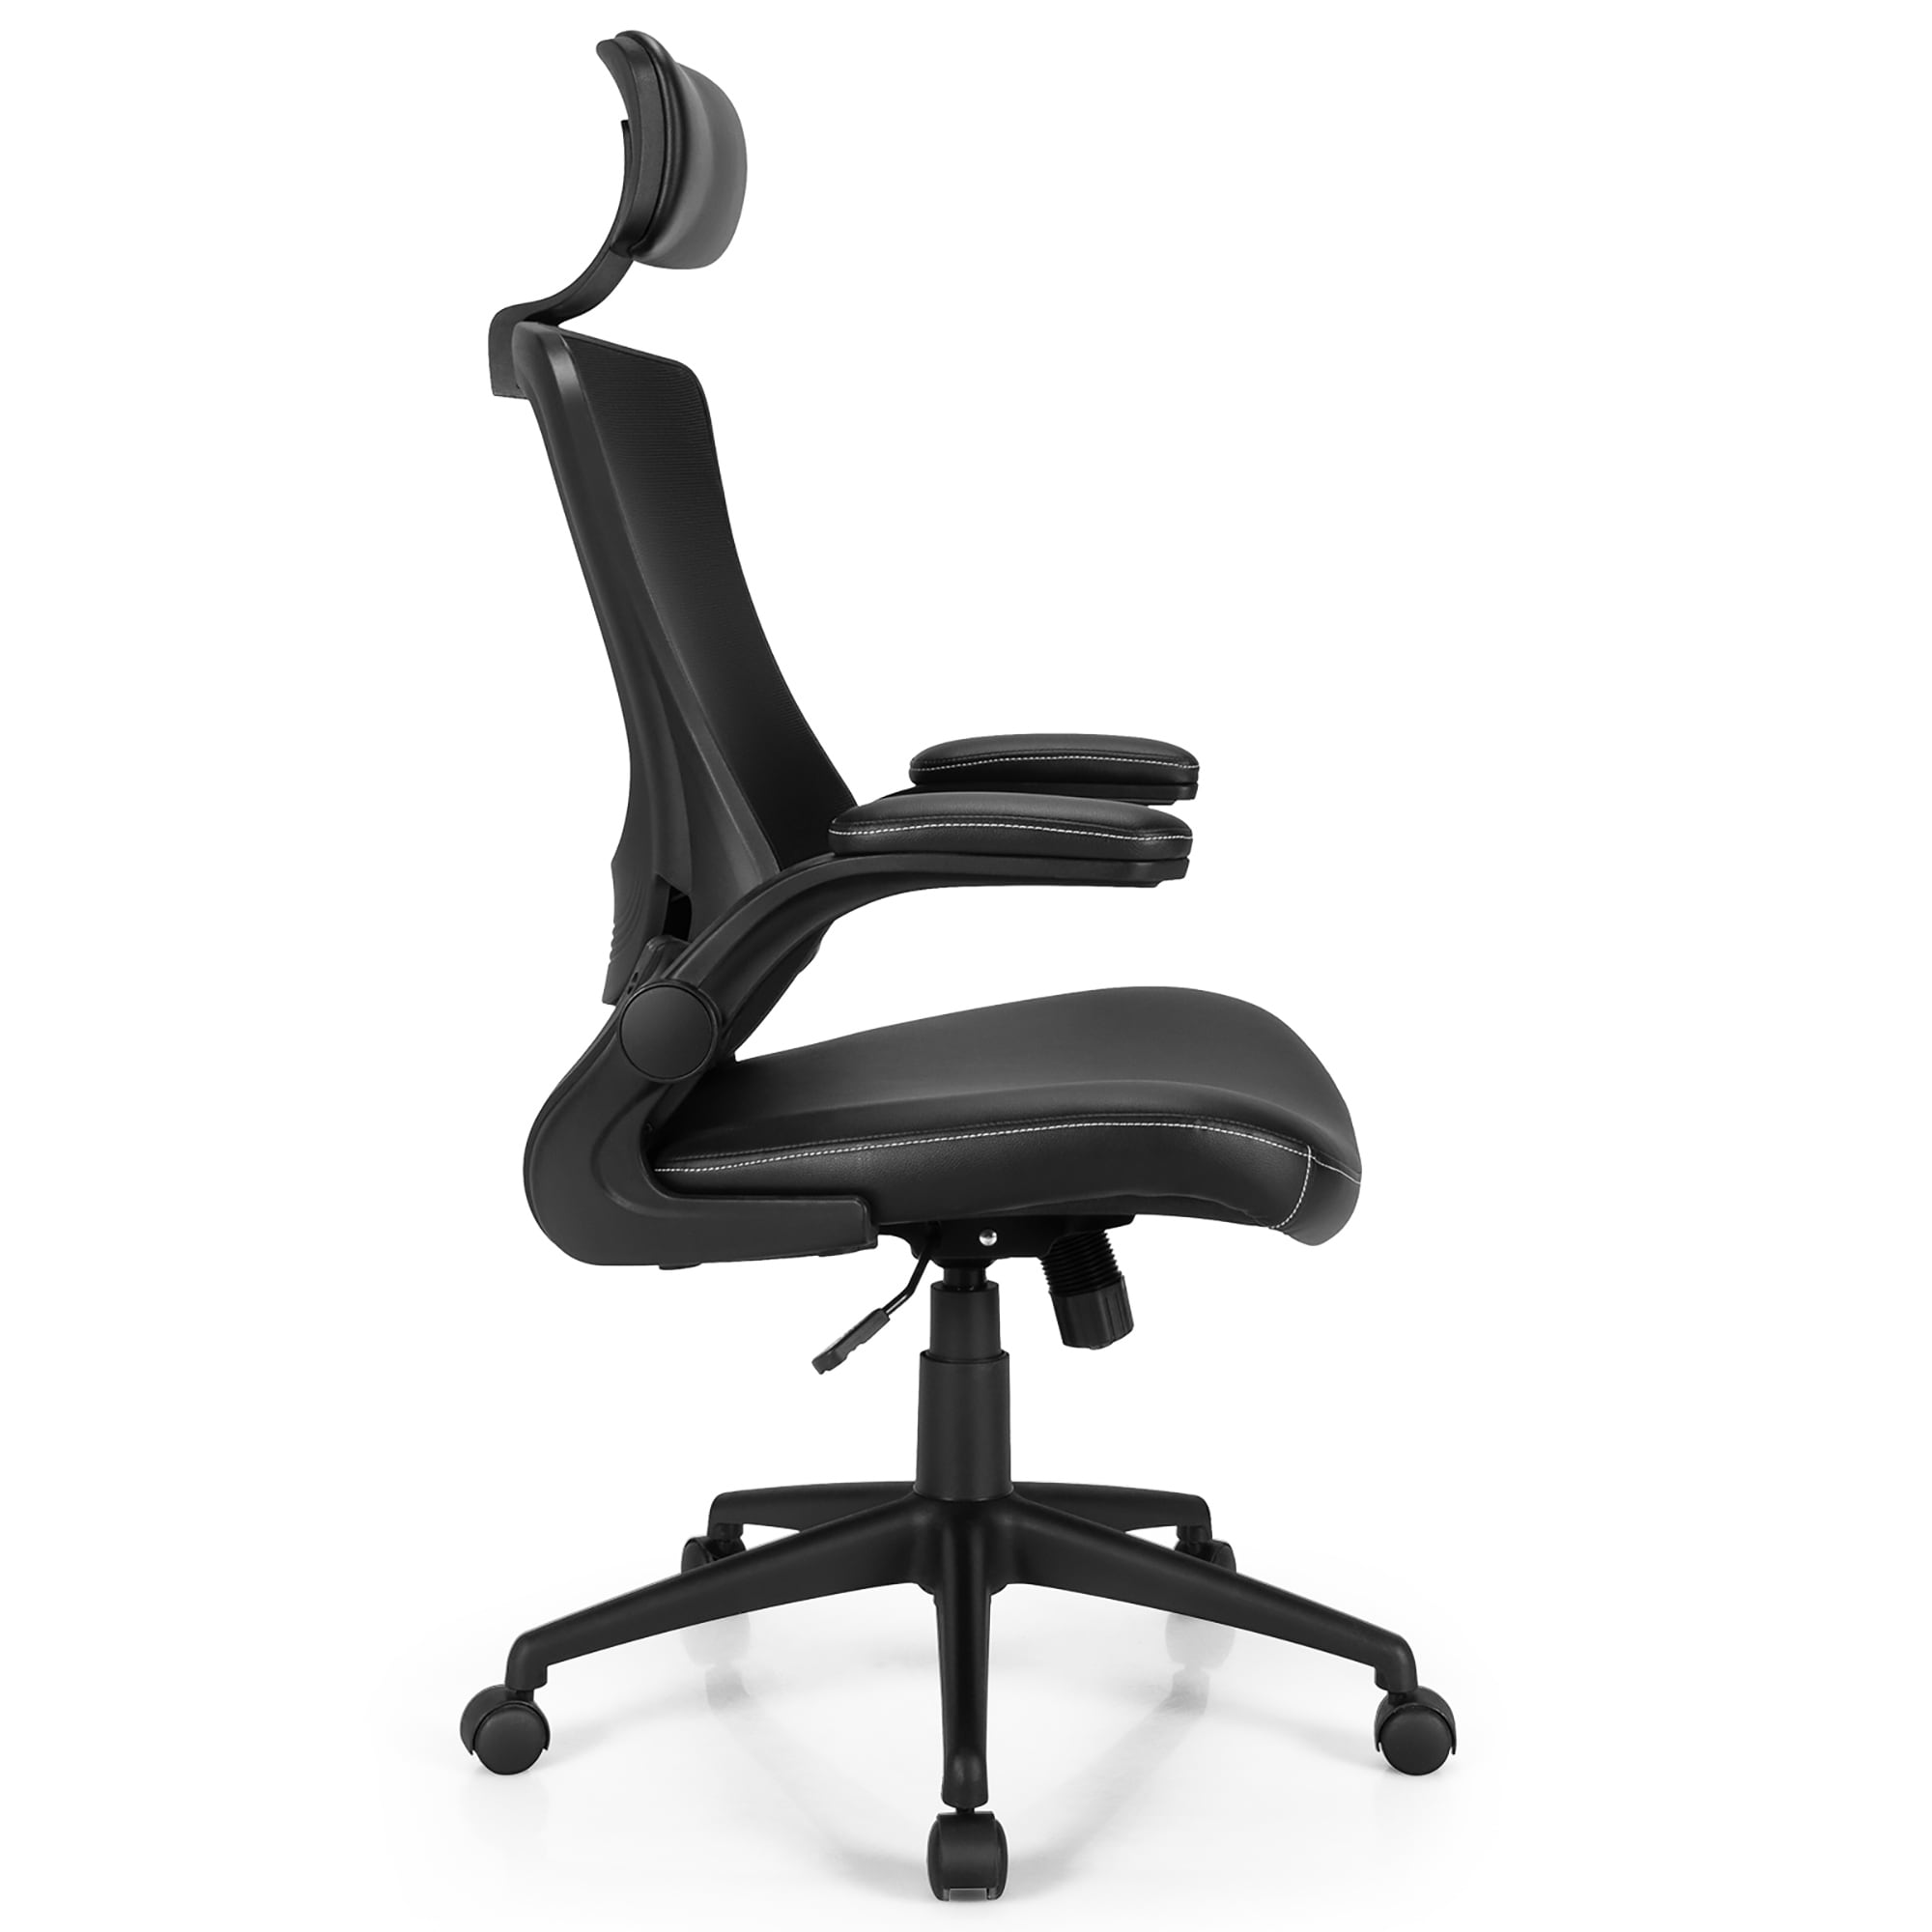 https://ak1.ostkcdn.com/images/products/is/images/direct/d45c87fae8404c1a42e2afe7e0bf8a4f2a3a8dce/Costway-Mesh-Back-Adjustable-Swivel-Office-Chair-w--Flip-up-Arms.jpg